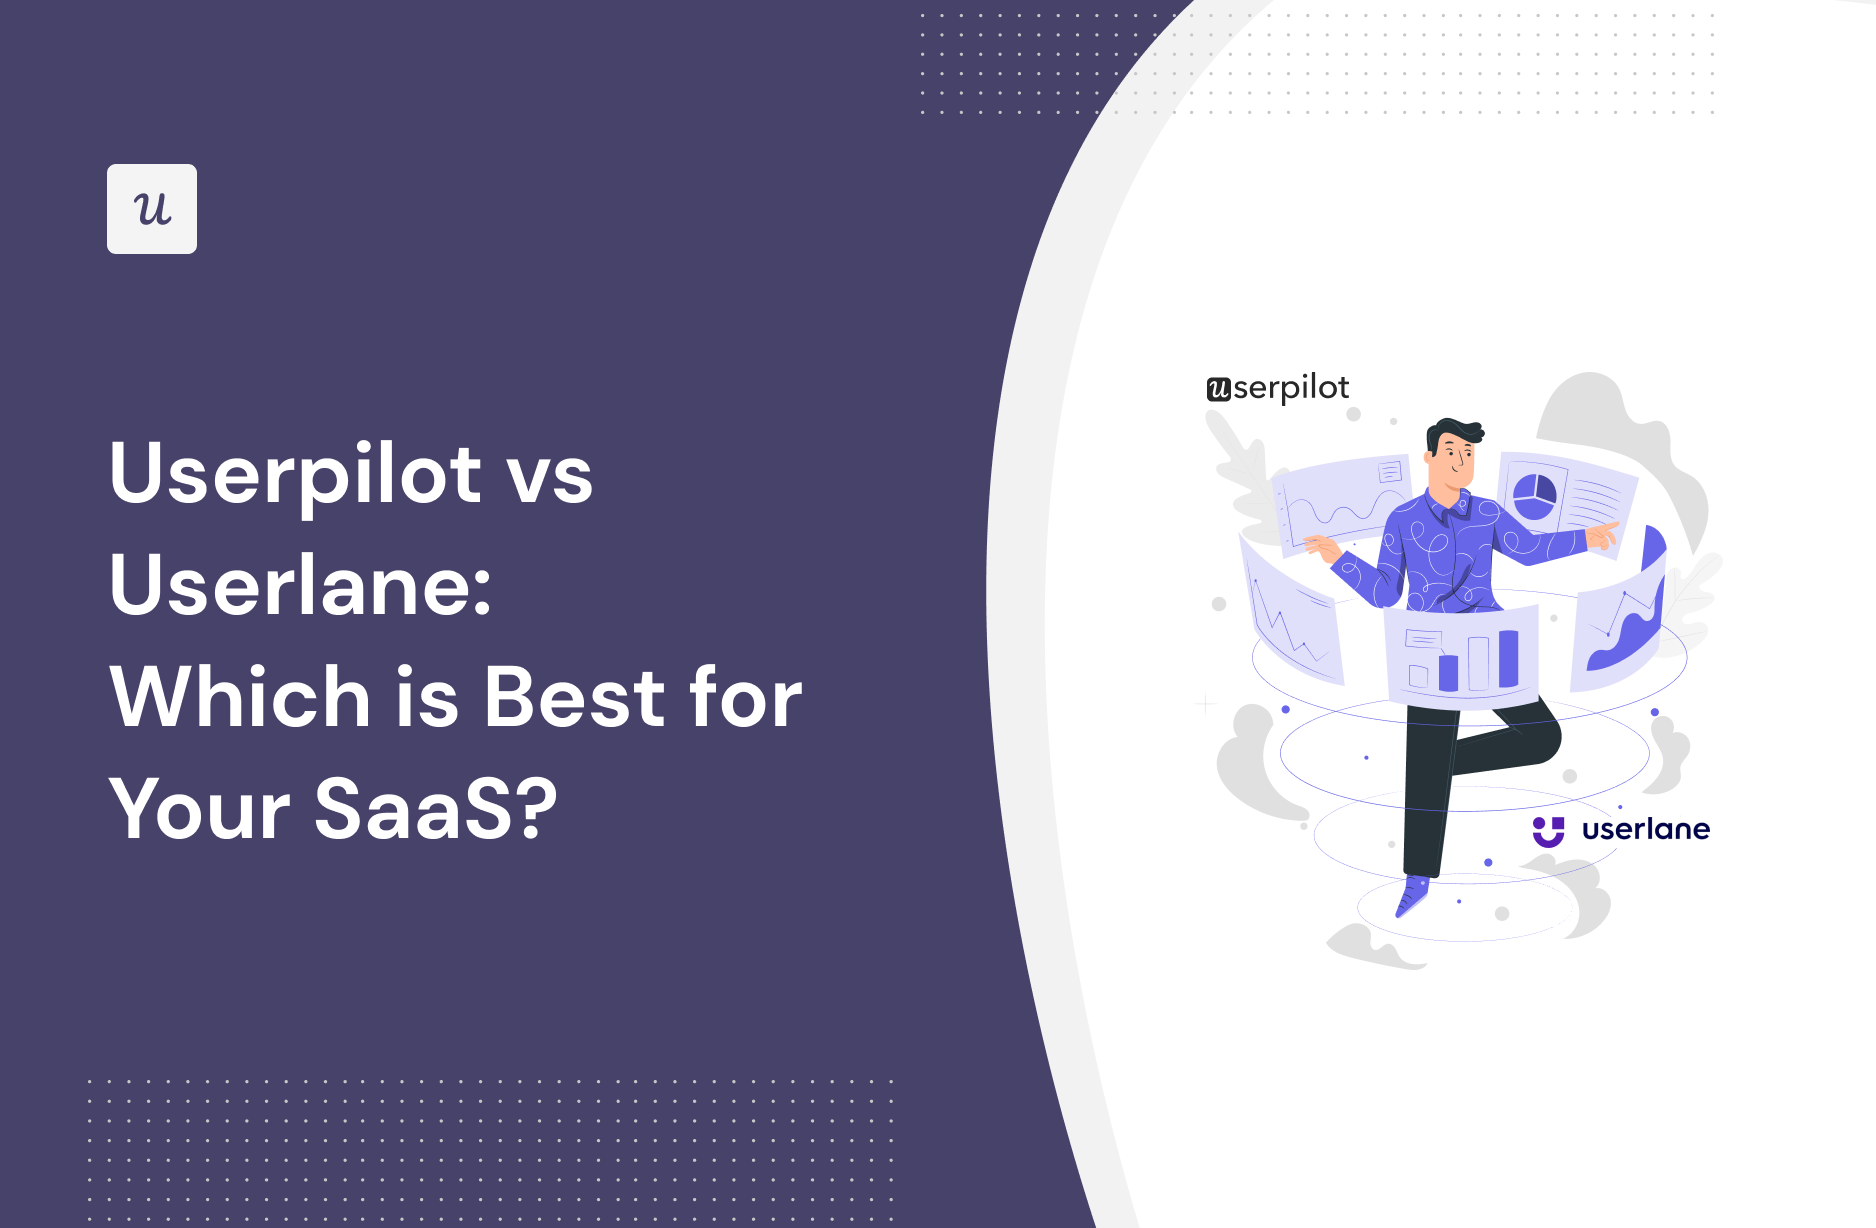 Userpilot vs Userlane: Which Is Best for Your SaaS?